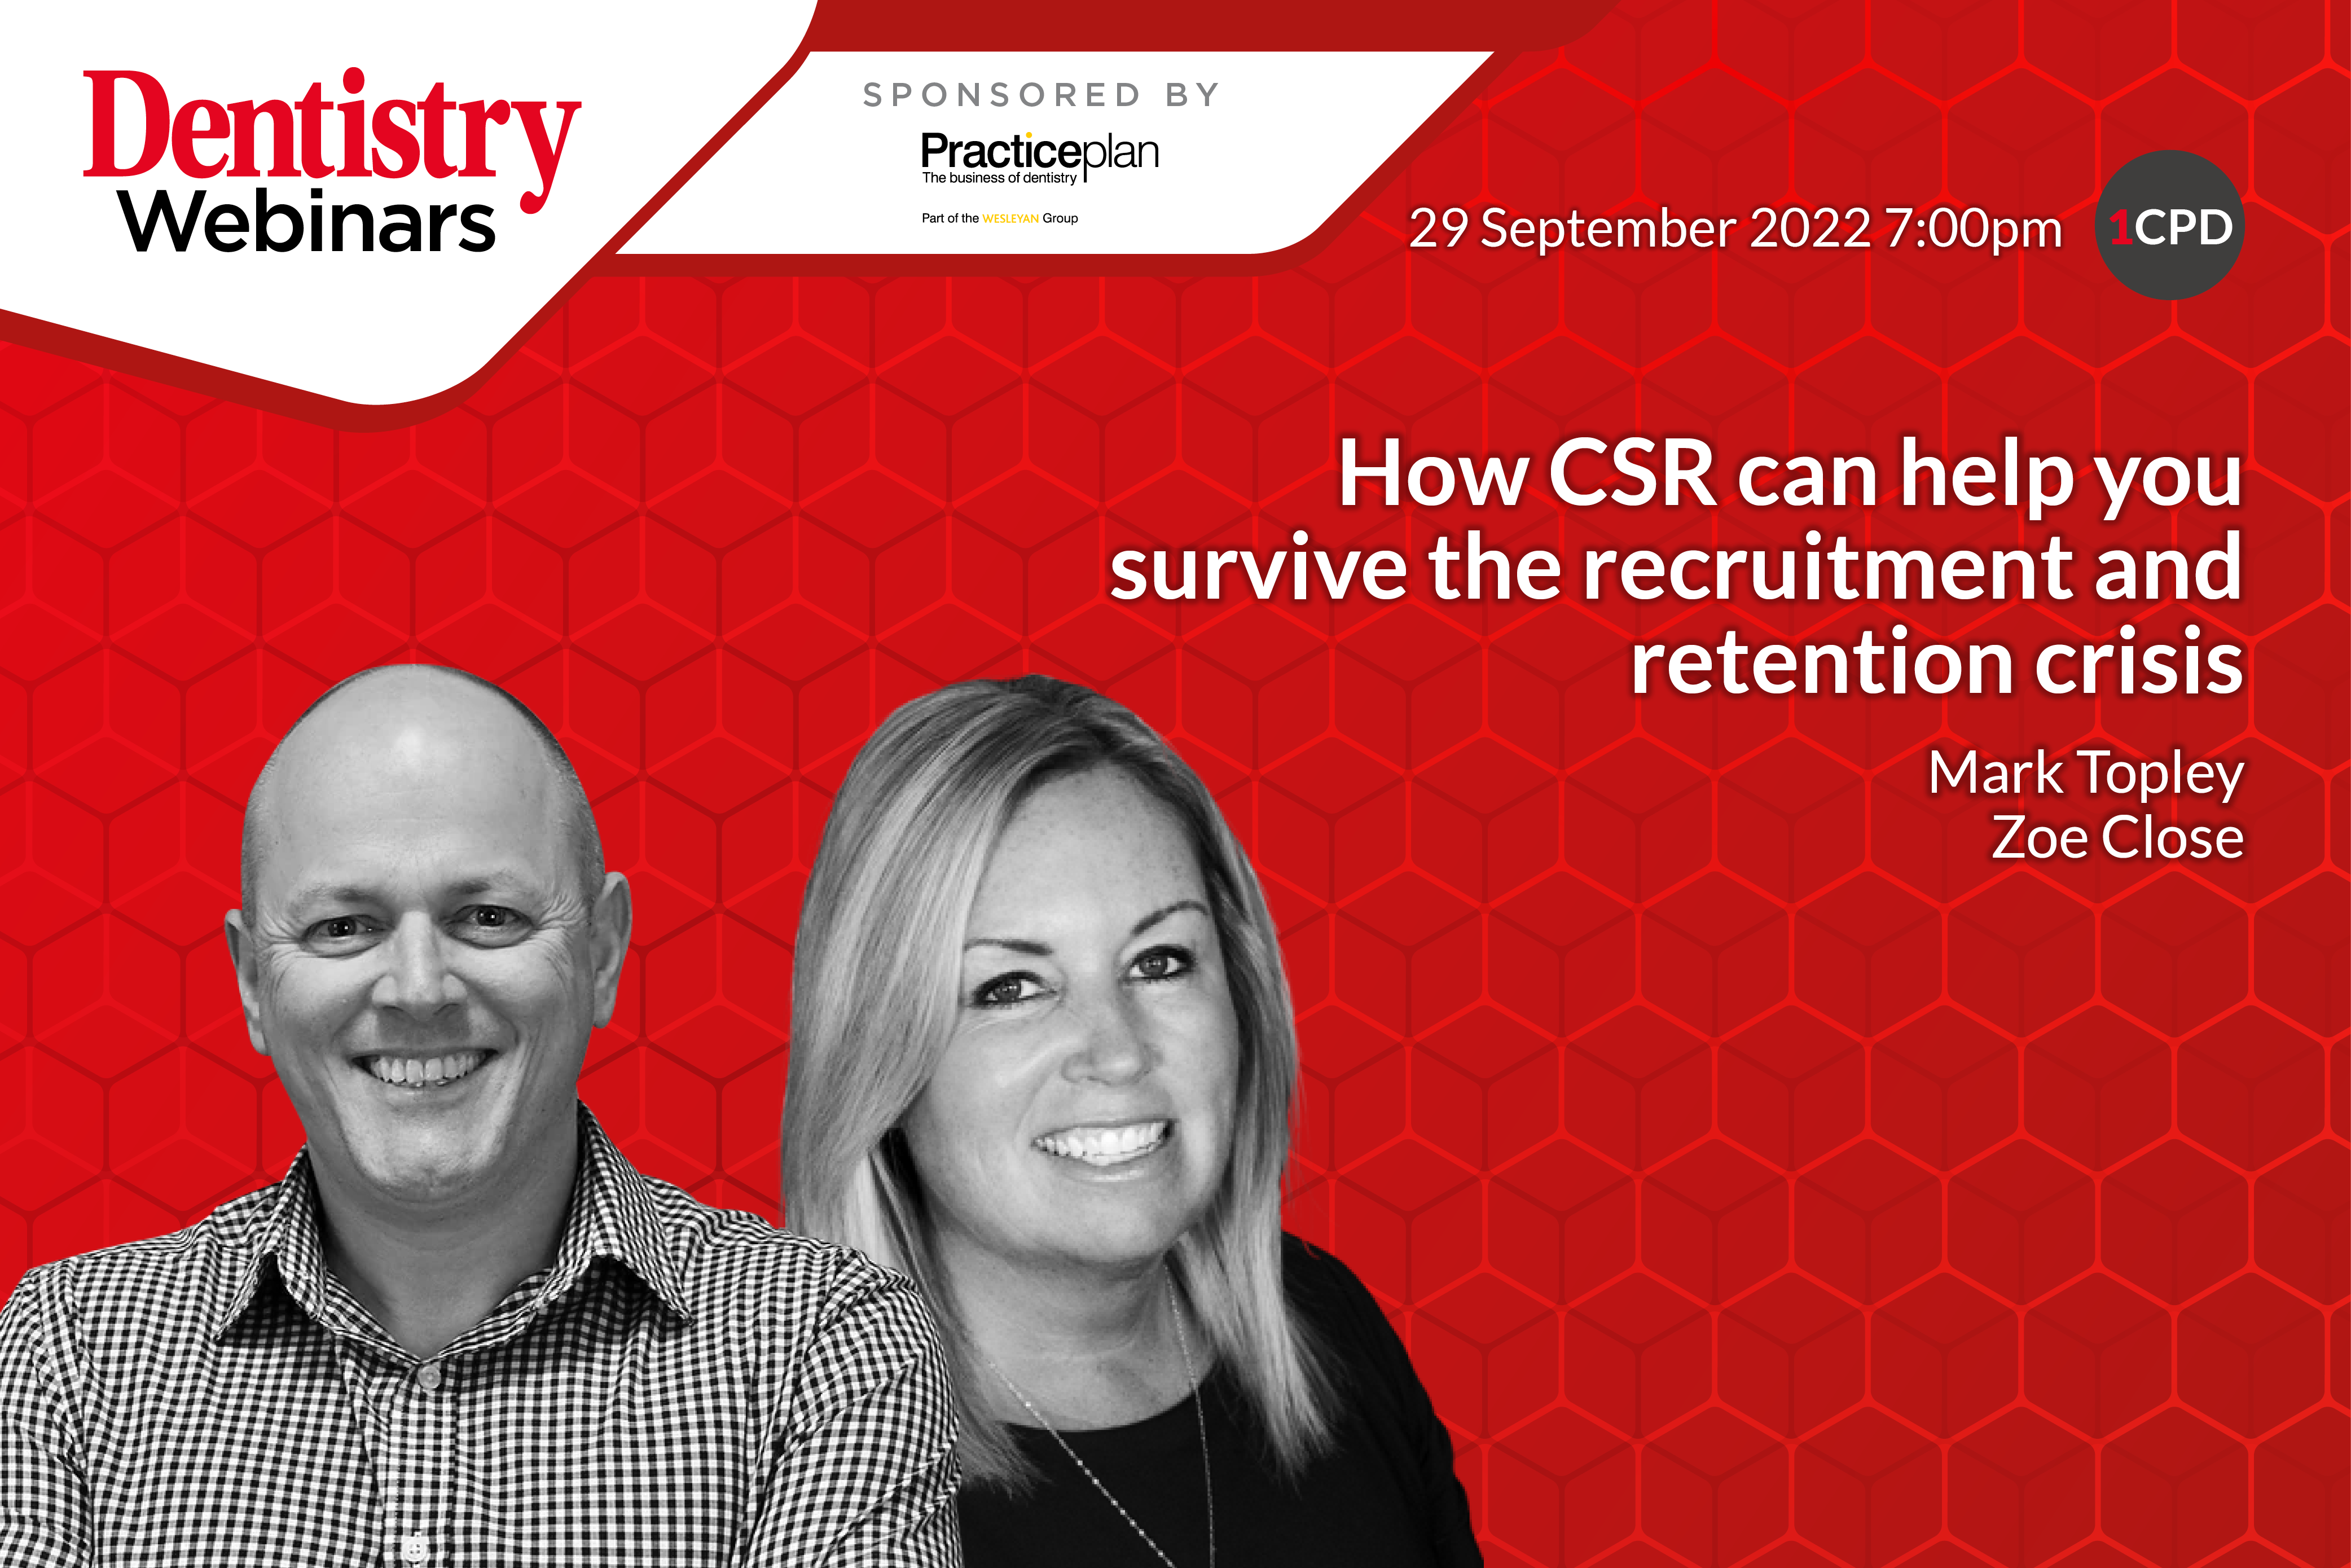 Join Mark Topley and Zoe Close on Thursday 29 September at 7pm as they discuss how CSR can help you survive the recruitment and retention crisis.